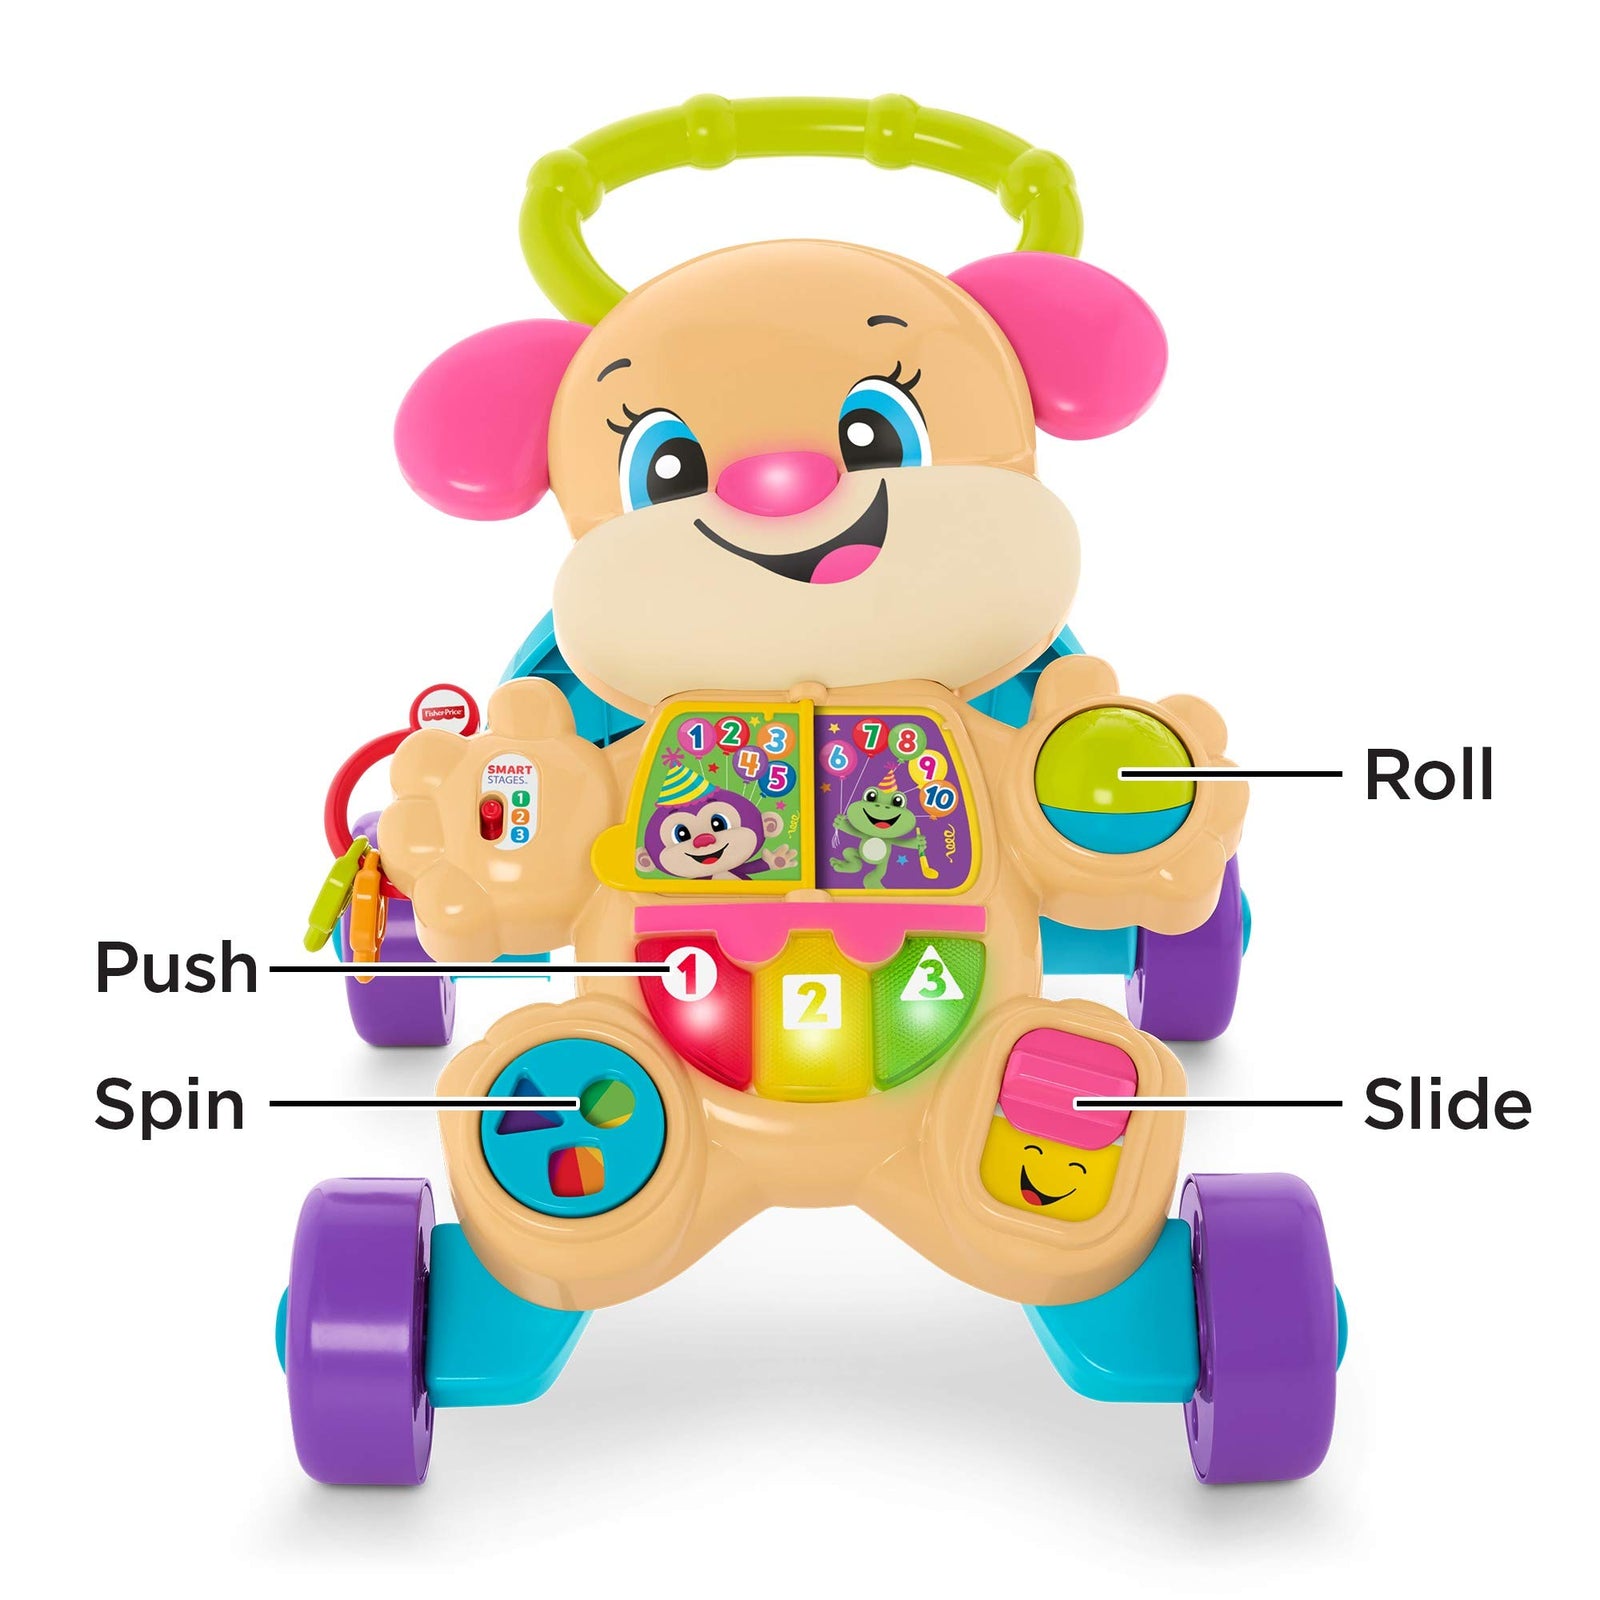 Fisher-Price Laugh & Learn Smart Stages Learn with Sis Walker, Musical Walking Toy for Babies and Toddlers Ages 6 to 36 Months